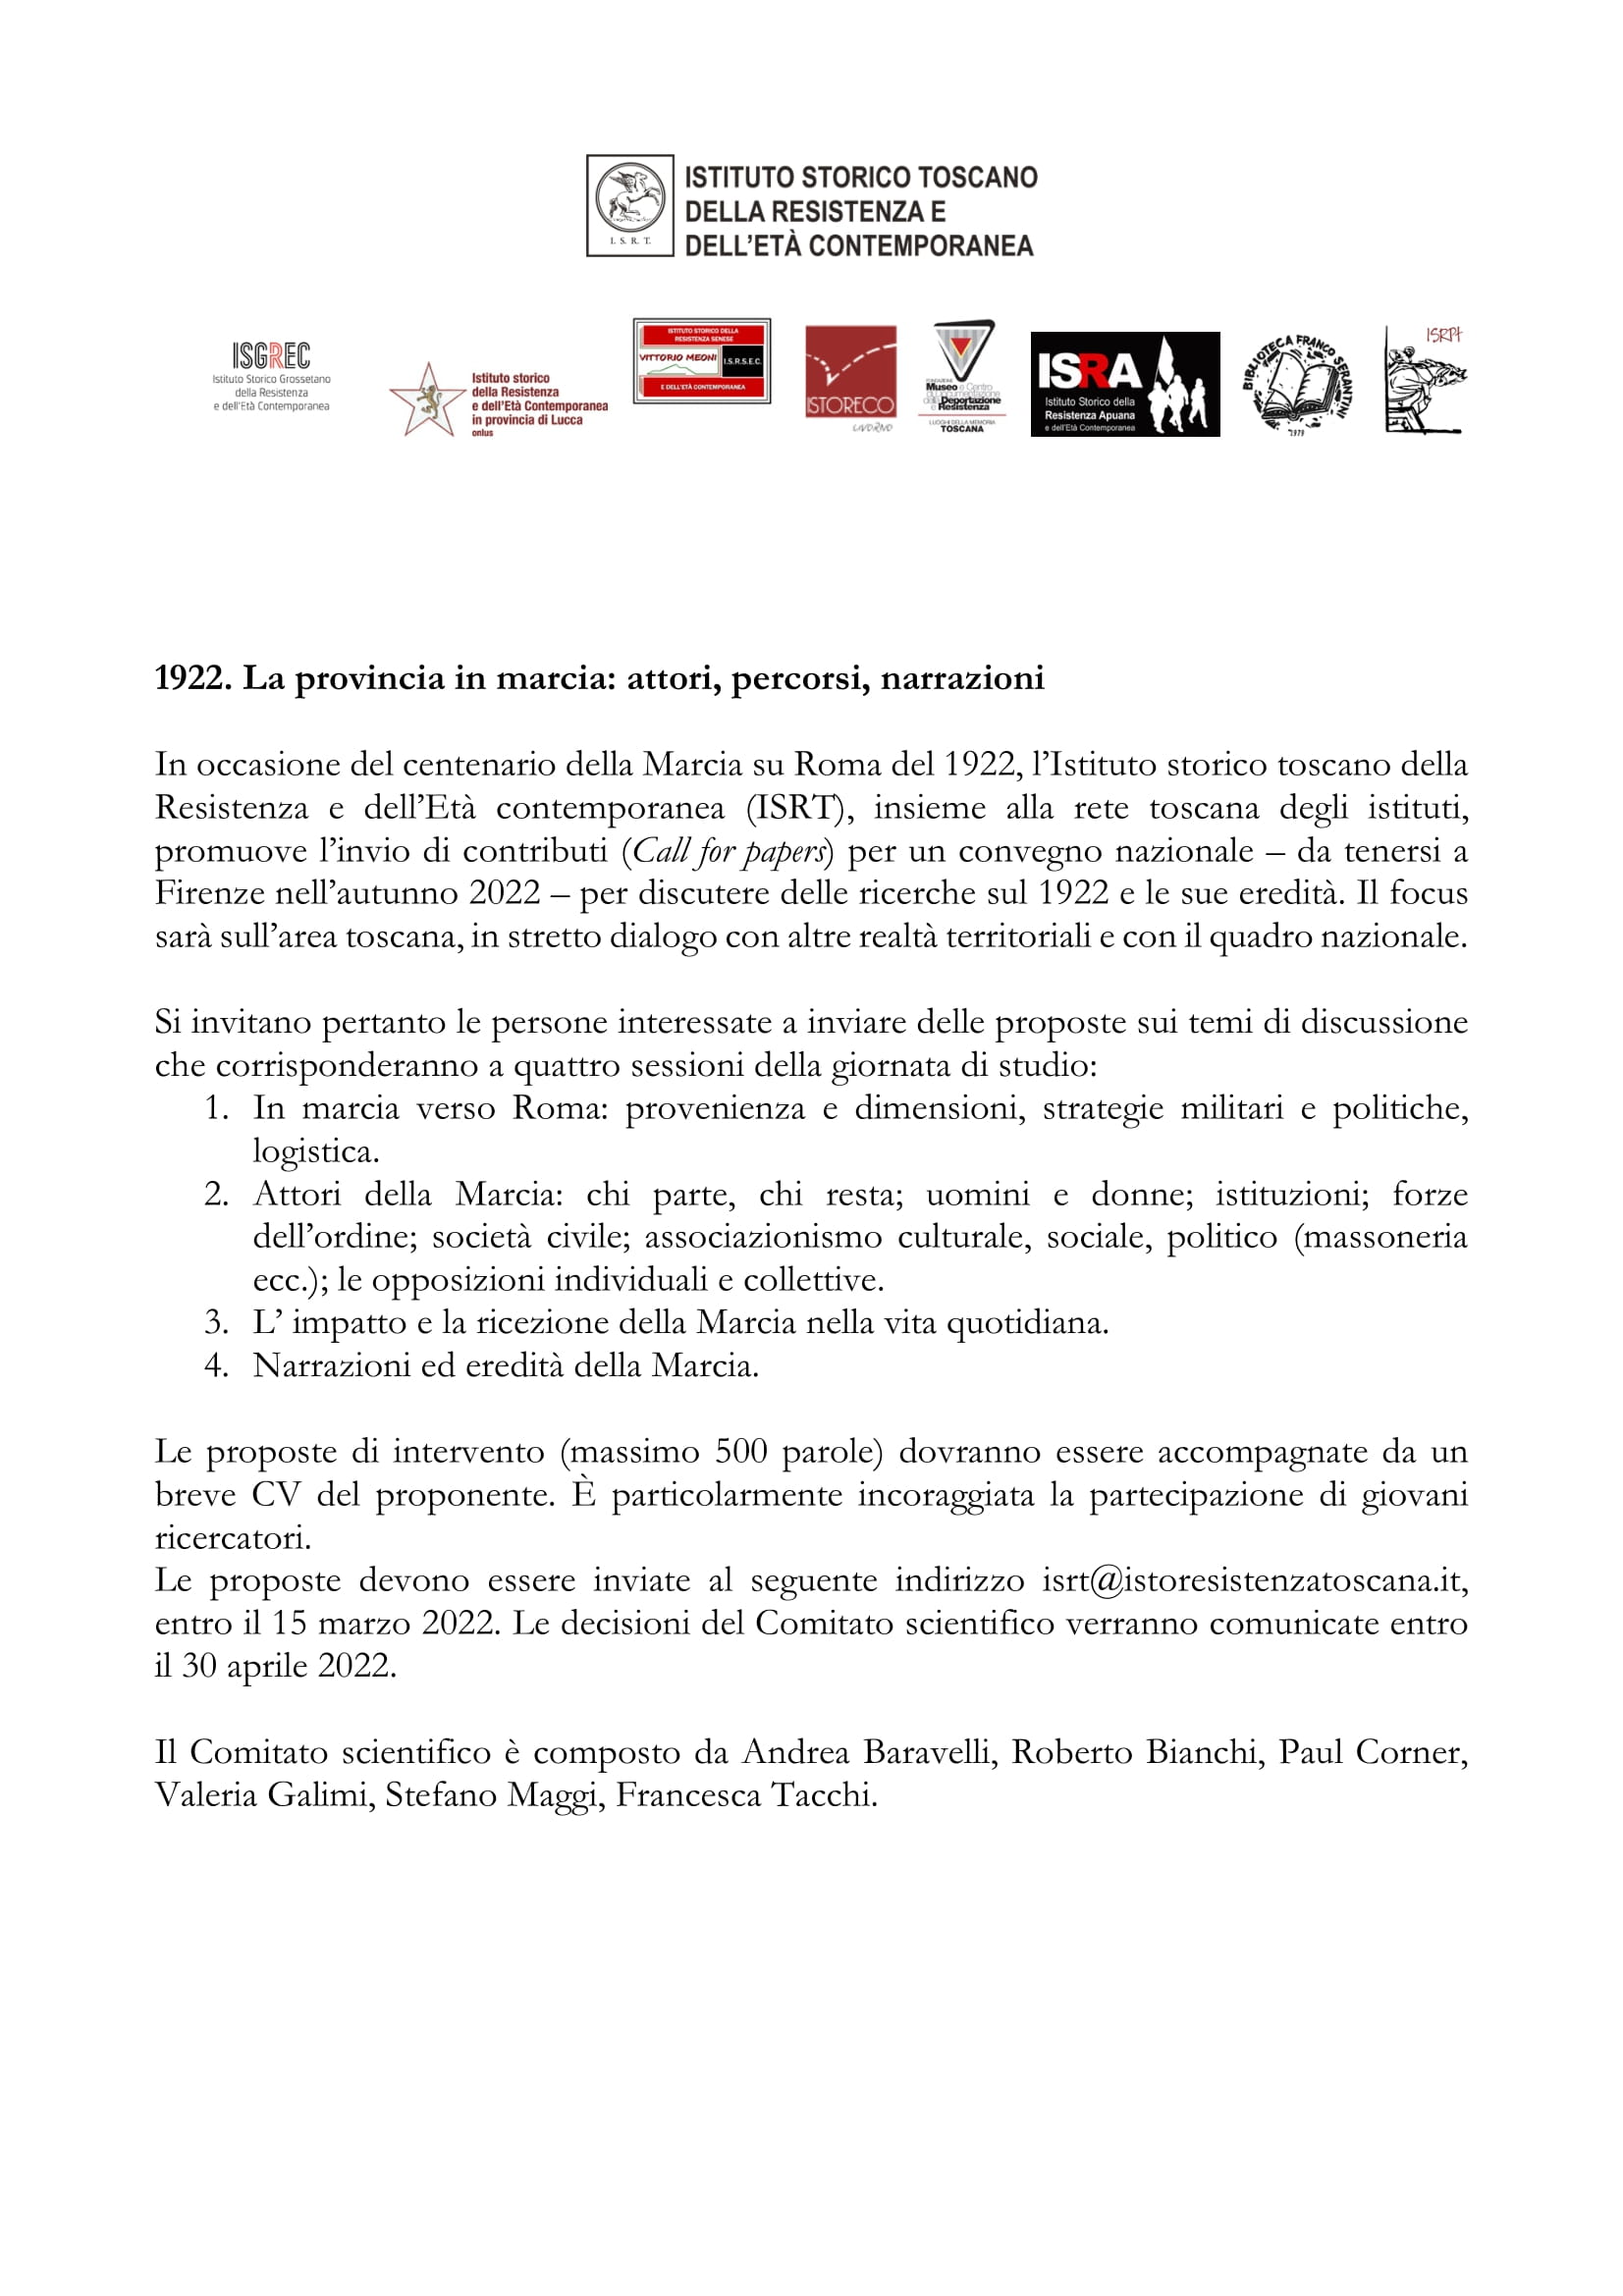 Call for papers_MarciasuRoma_2022-1